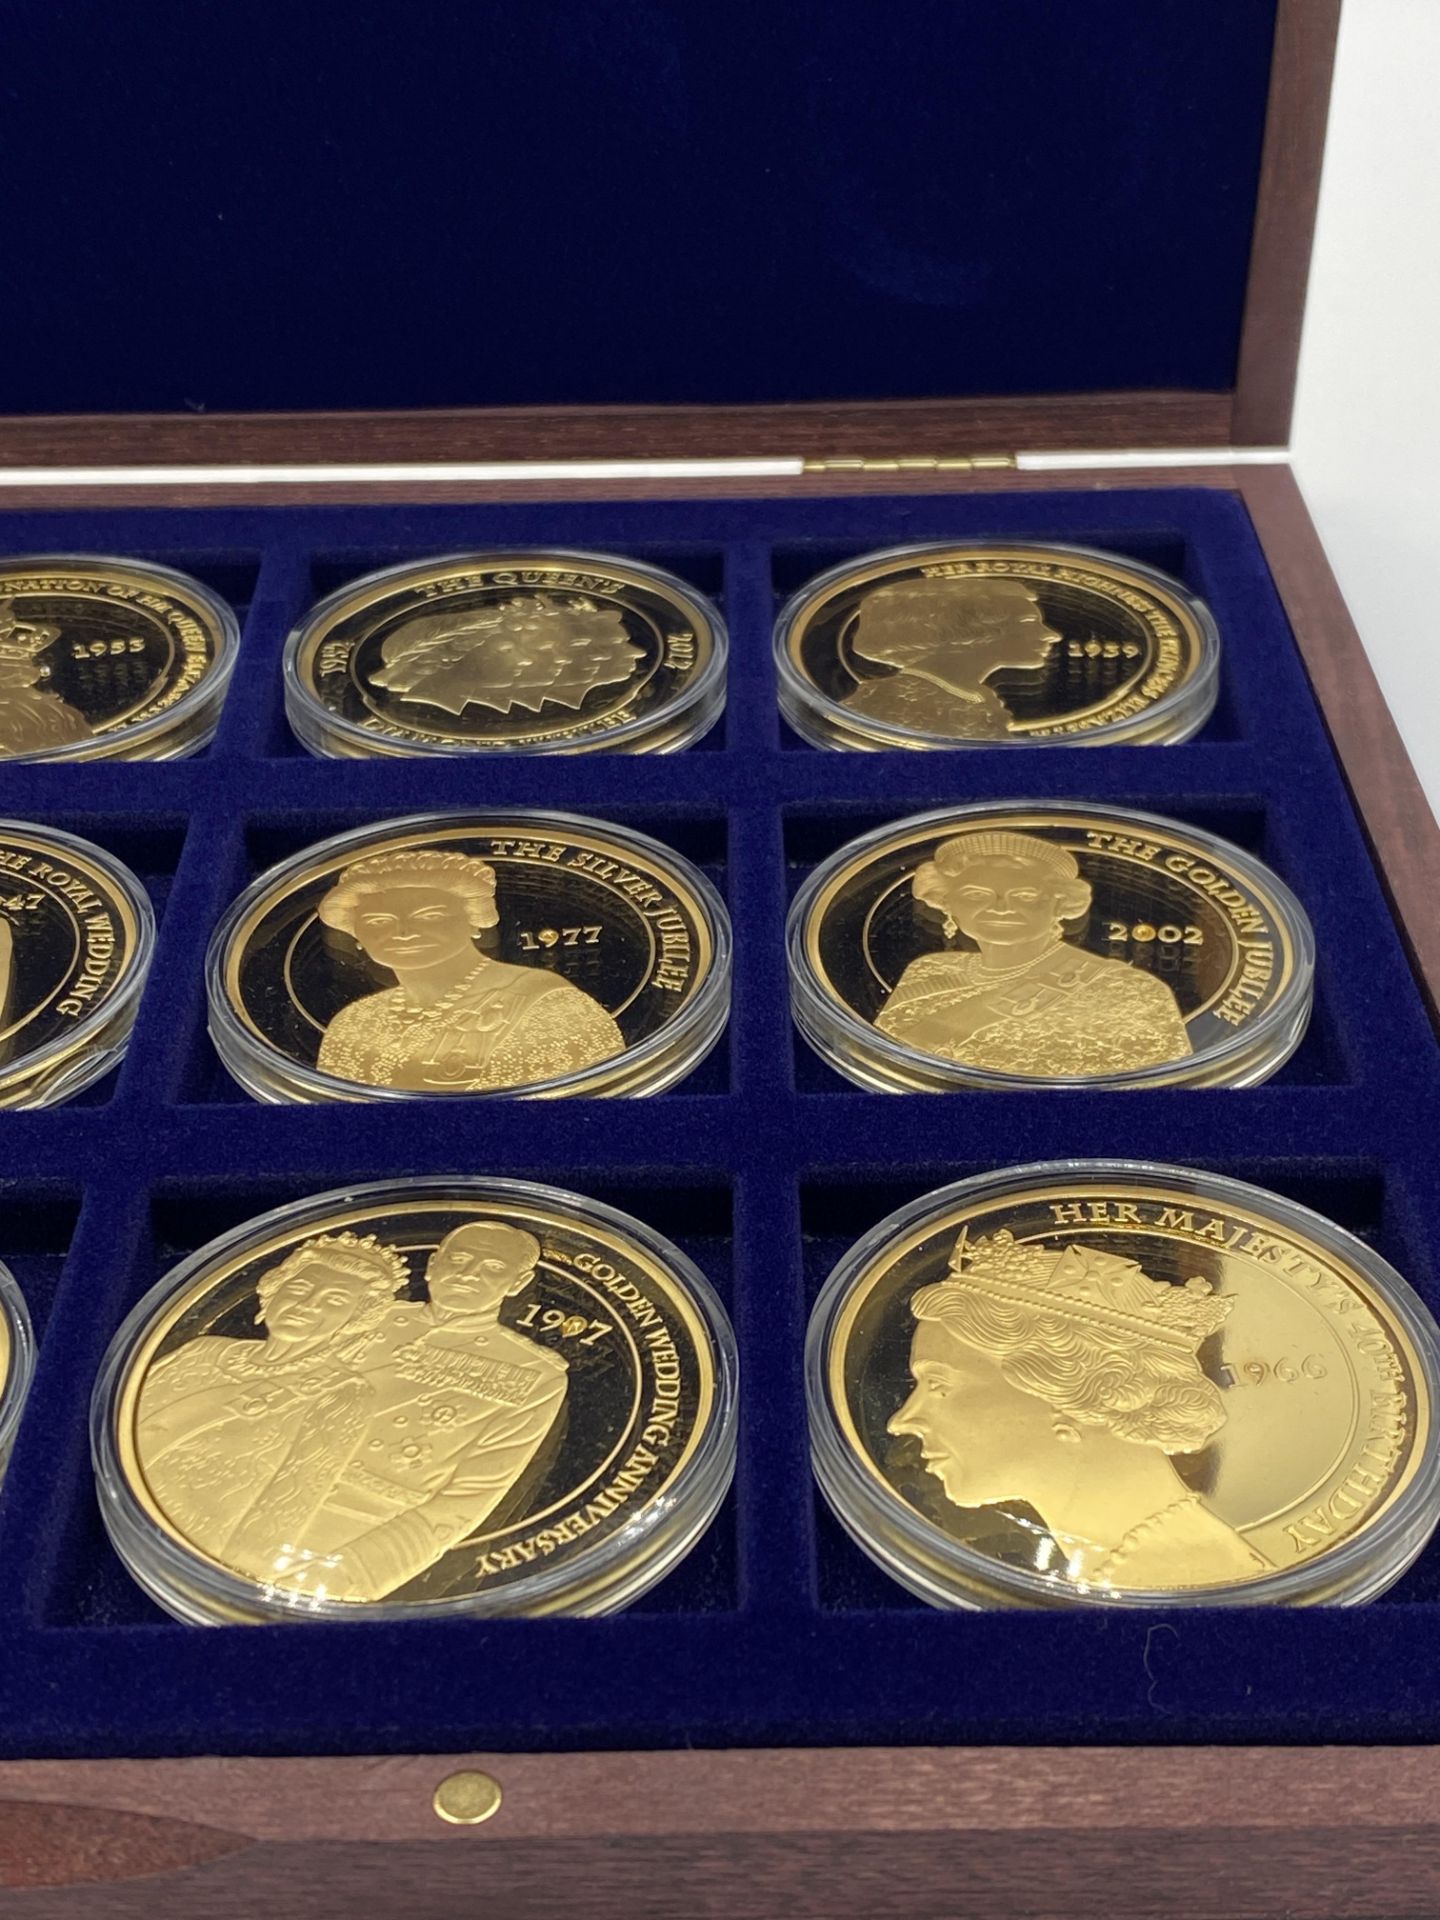 Twelve gold plated Portraits of the Queen Diamond Jubilee coins in presentation box - Image 4 of 6